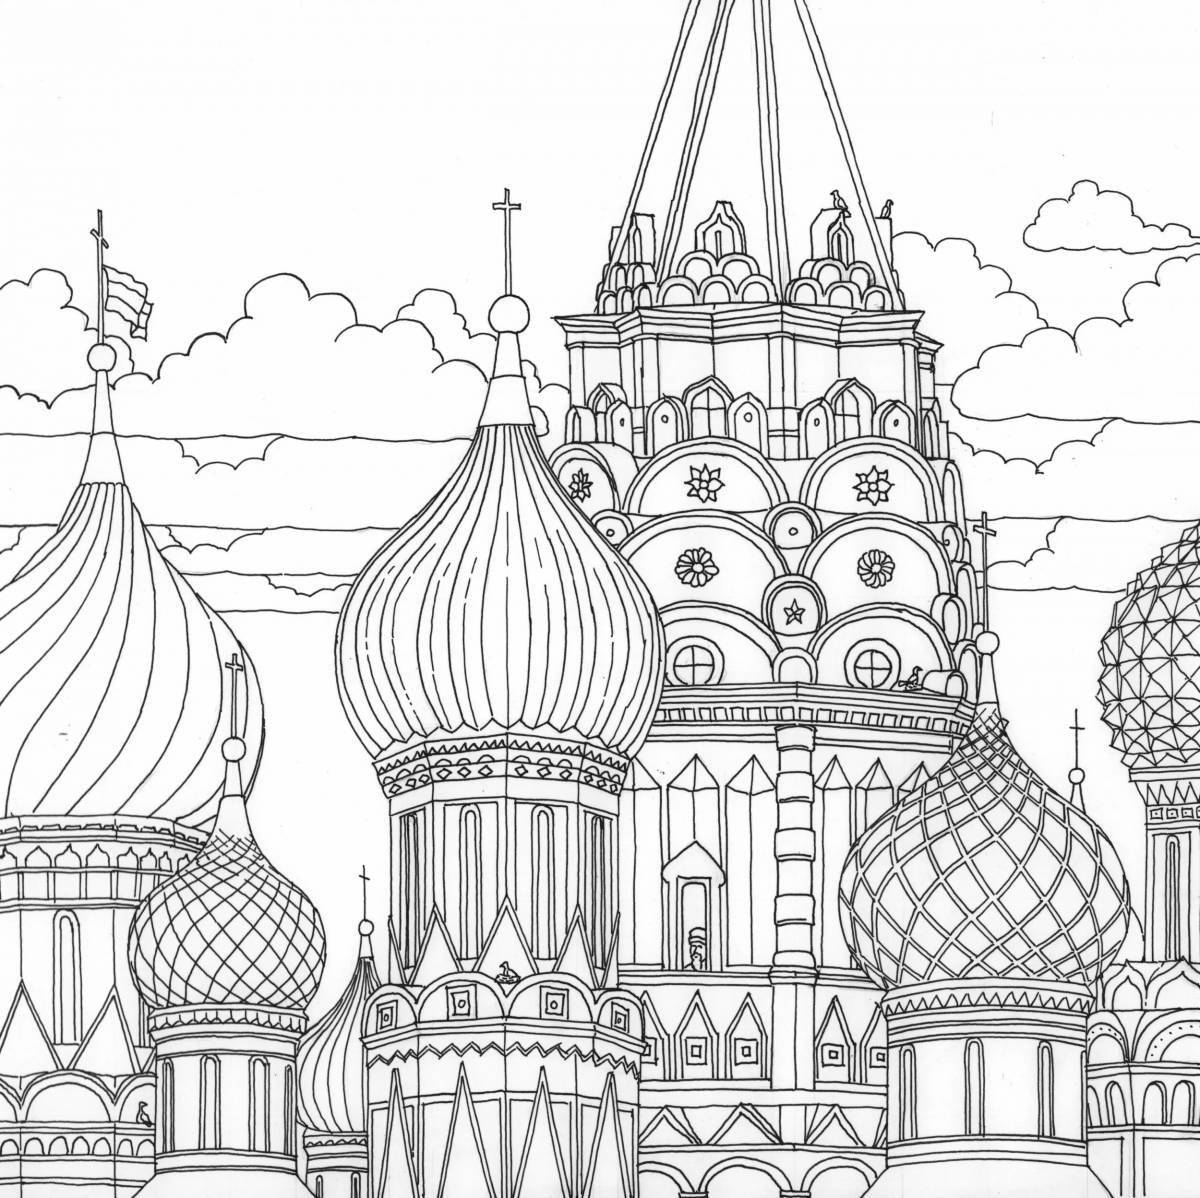 Coloring page glowing saint basil's cathedral